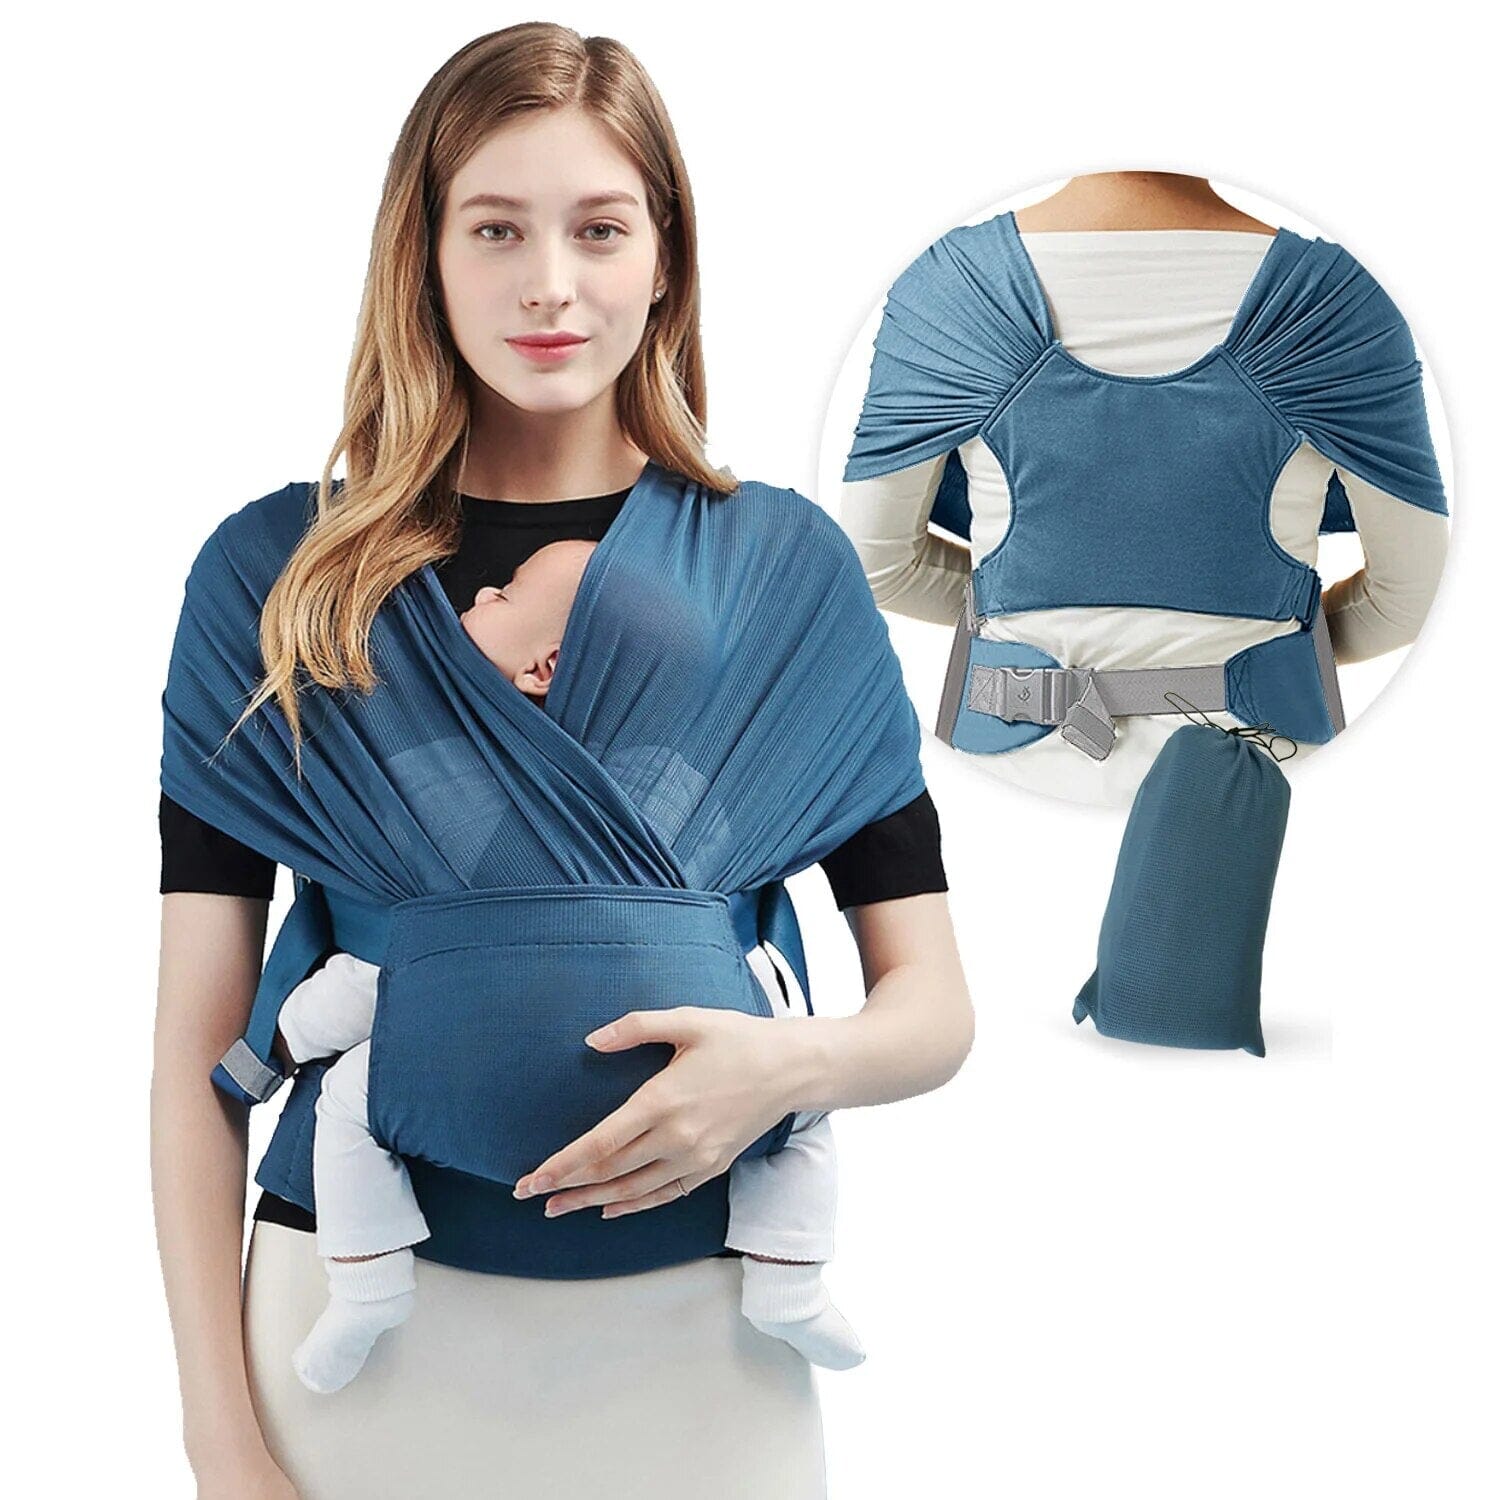 Adjustabl Bags Newborn Stuff Baby Carriers Infant Wrap Sling Breathable for Babies Girl and Boy Baby Bubble Store blue 